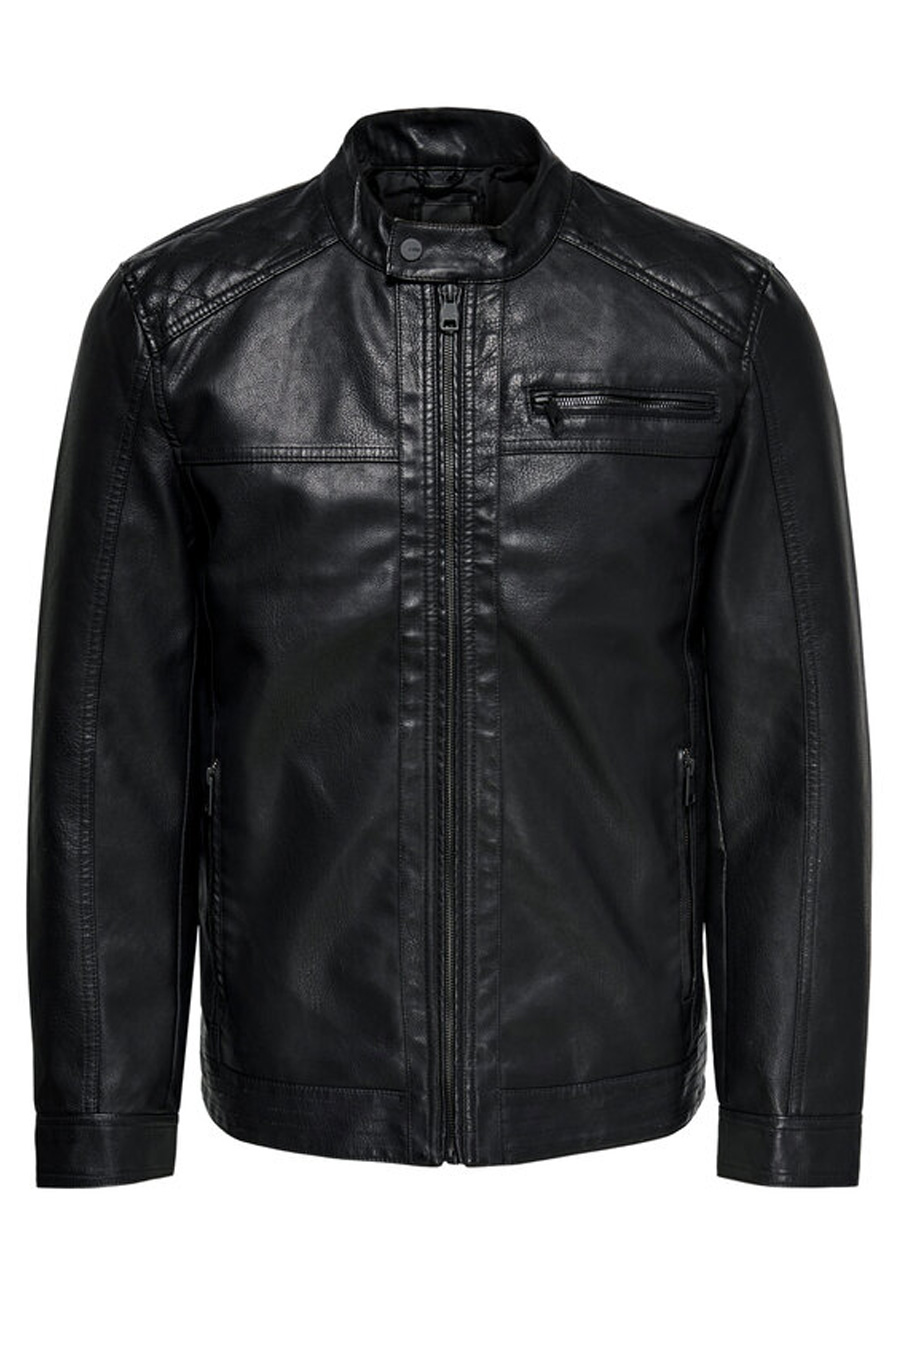 Nahkjakid ONLY & SONS 22011975-BLACK